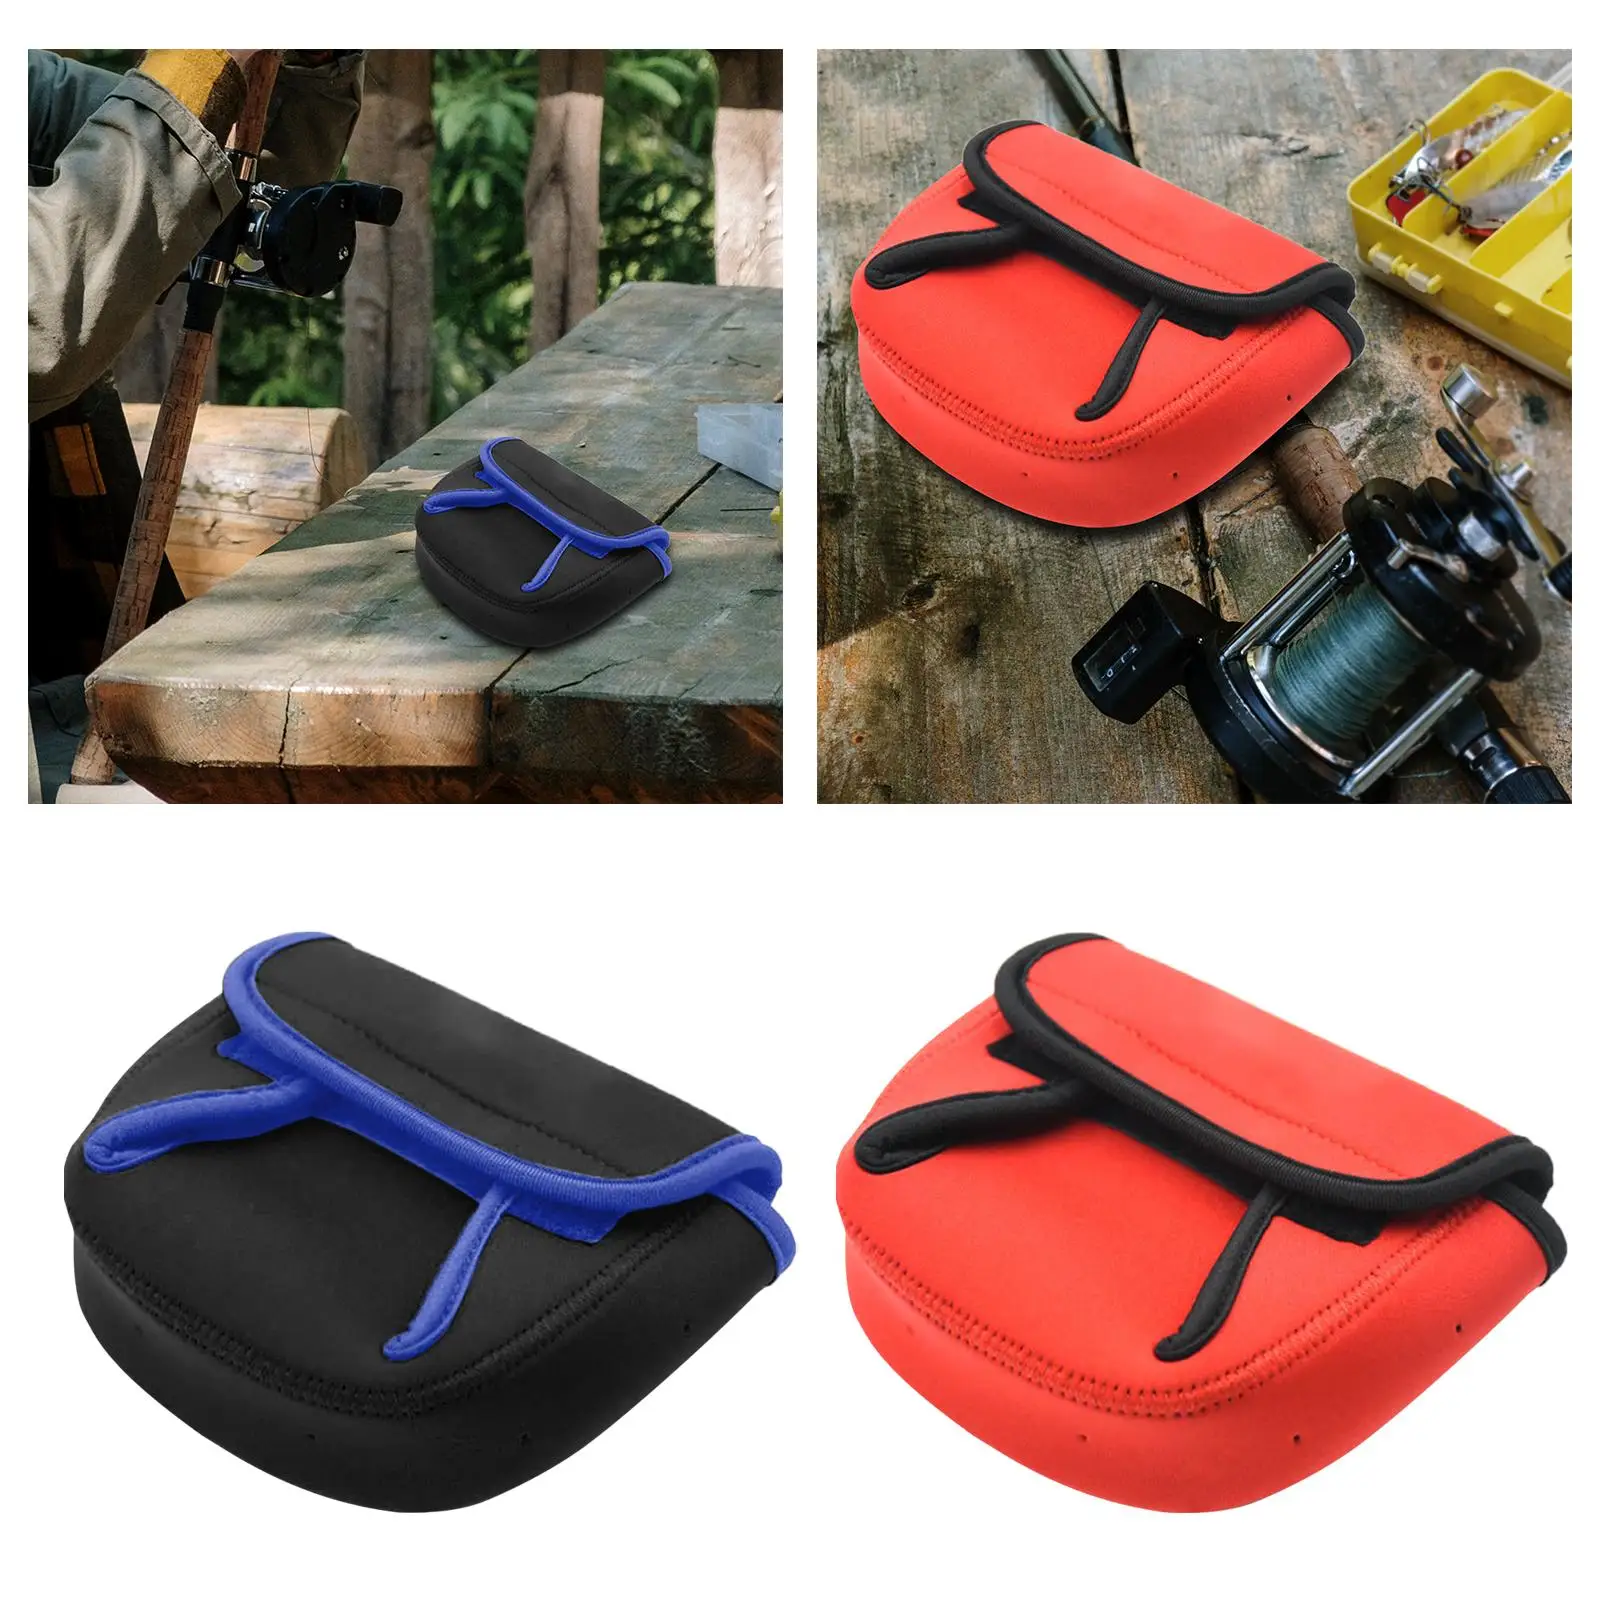 Fishing Reel Cover Pouch Bag Durable Storage Bag Fishing Gear Accessories Outdoor Fishing Bag Water Resistant Container Neoprene